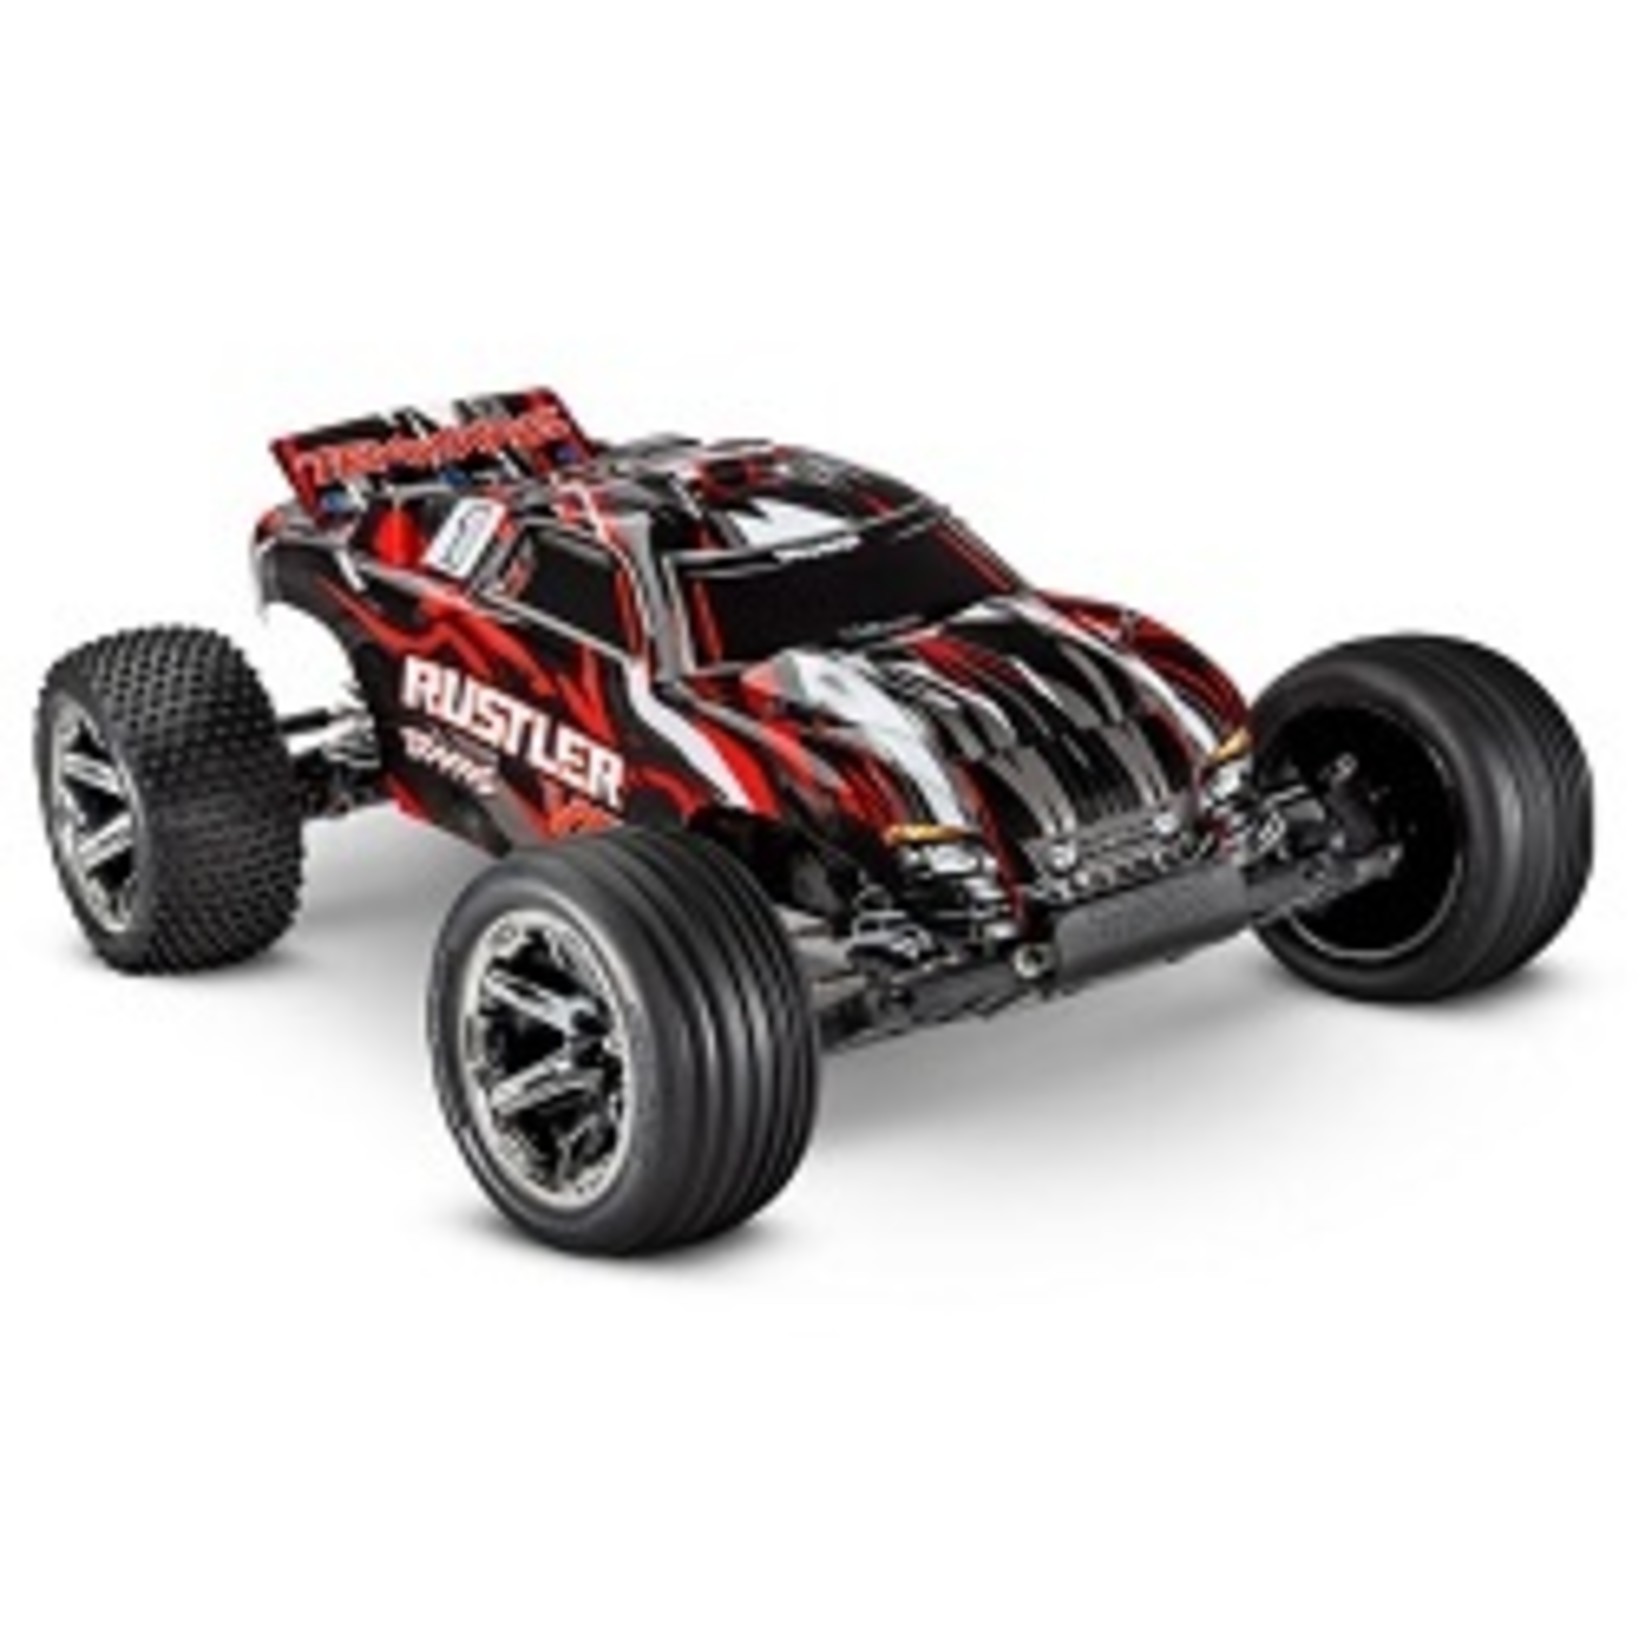 Traxxas 37076-74-RED Rustler® VXL:  1/10 Scale Stadium Truck with TQi™ Traxxas Link™ Enabled 2.4GHz Radio System & Traxxas Stability Management (TSM)®